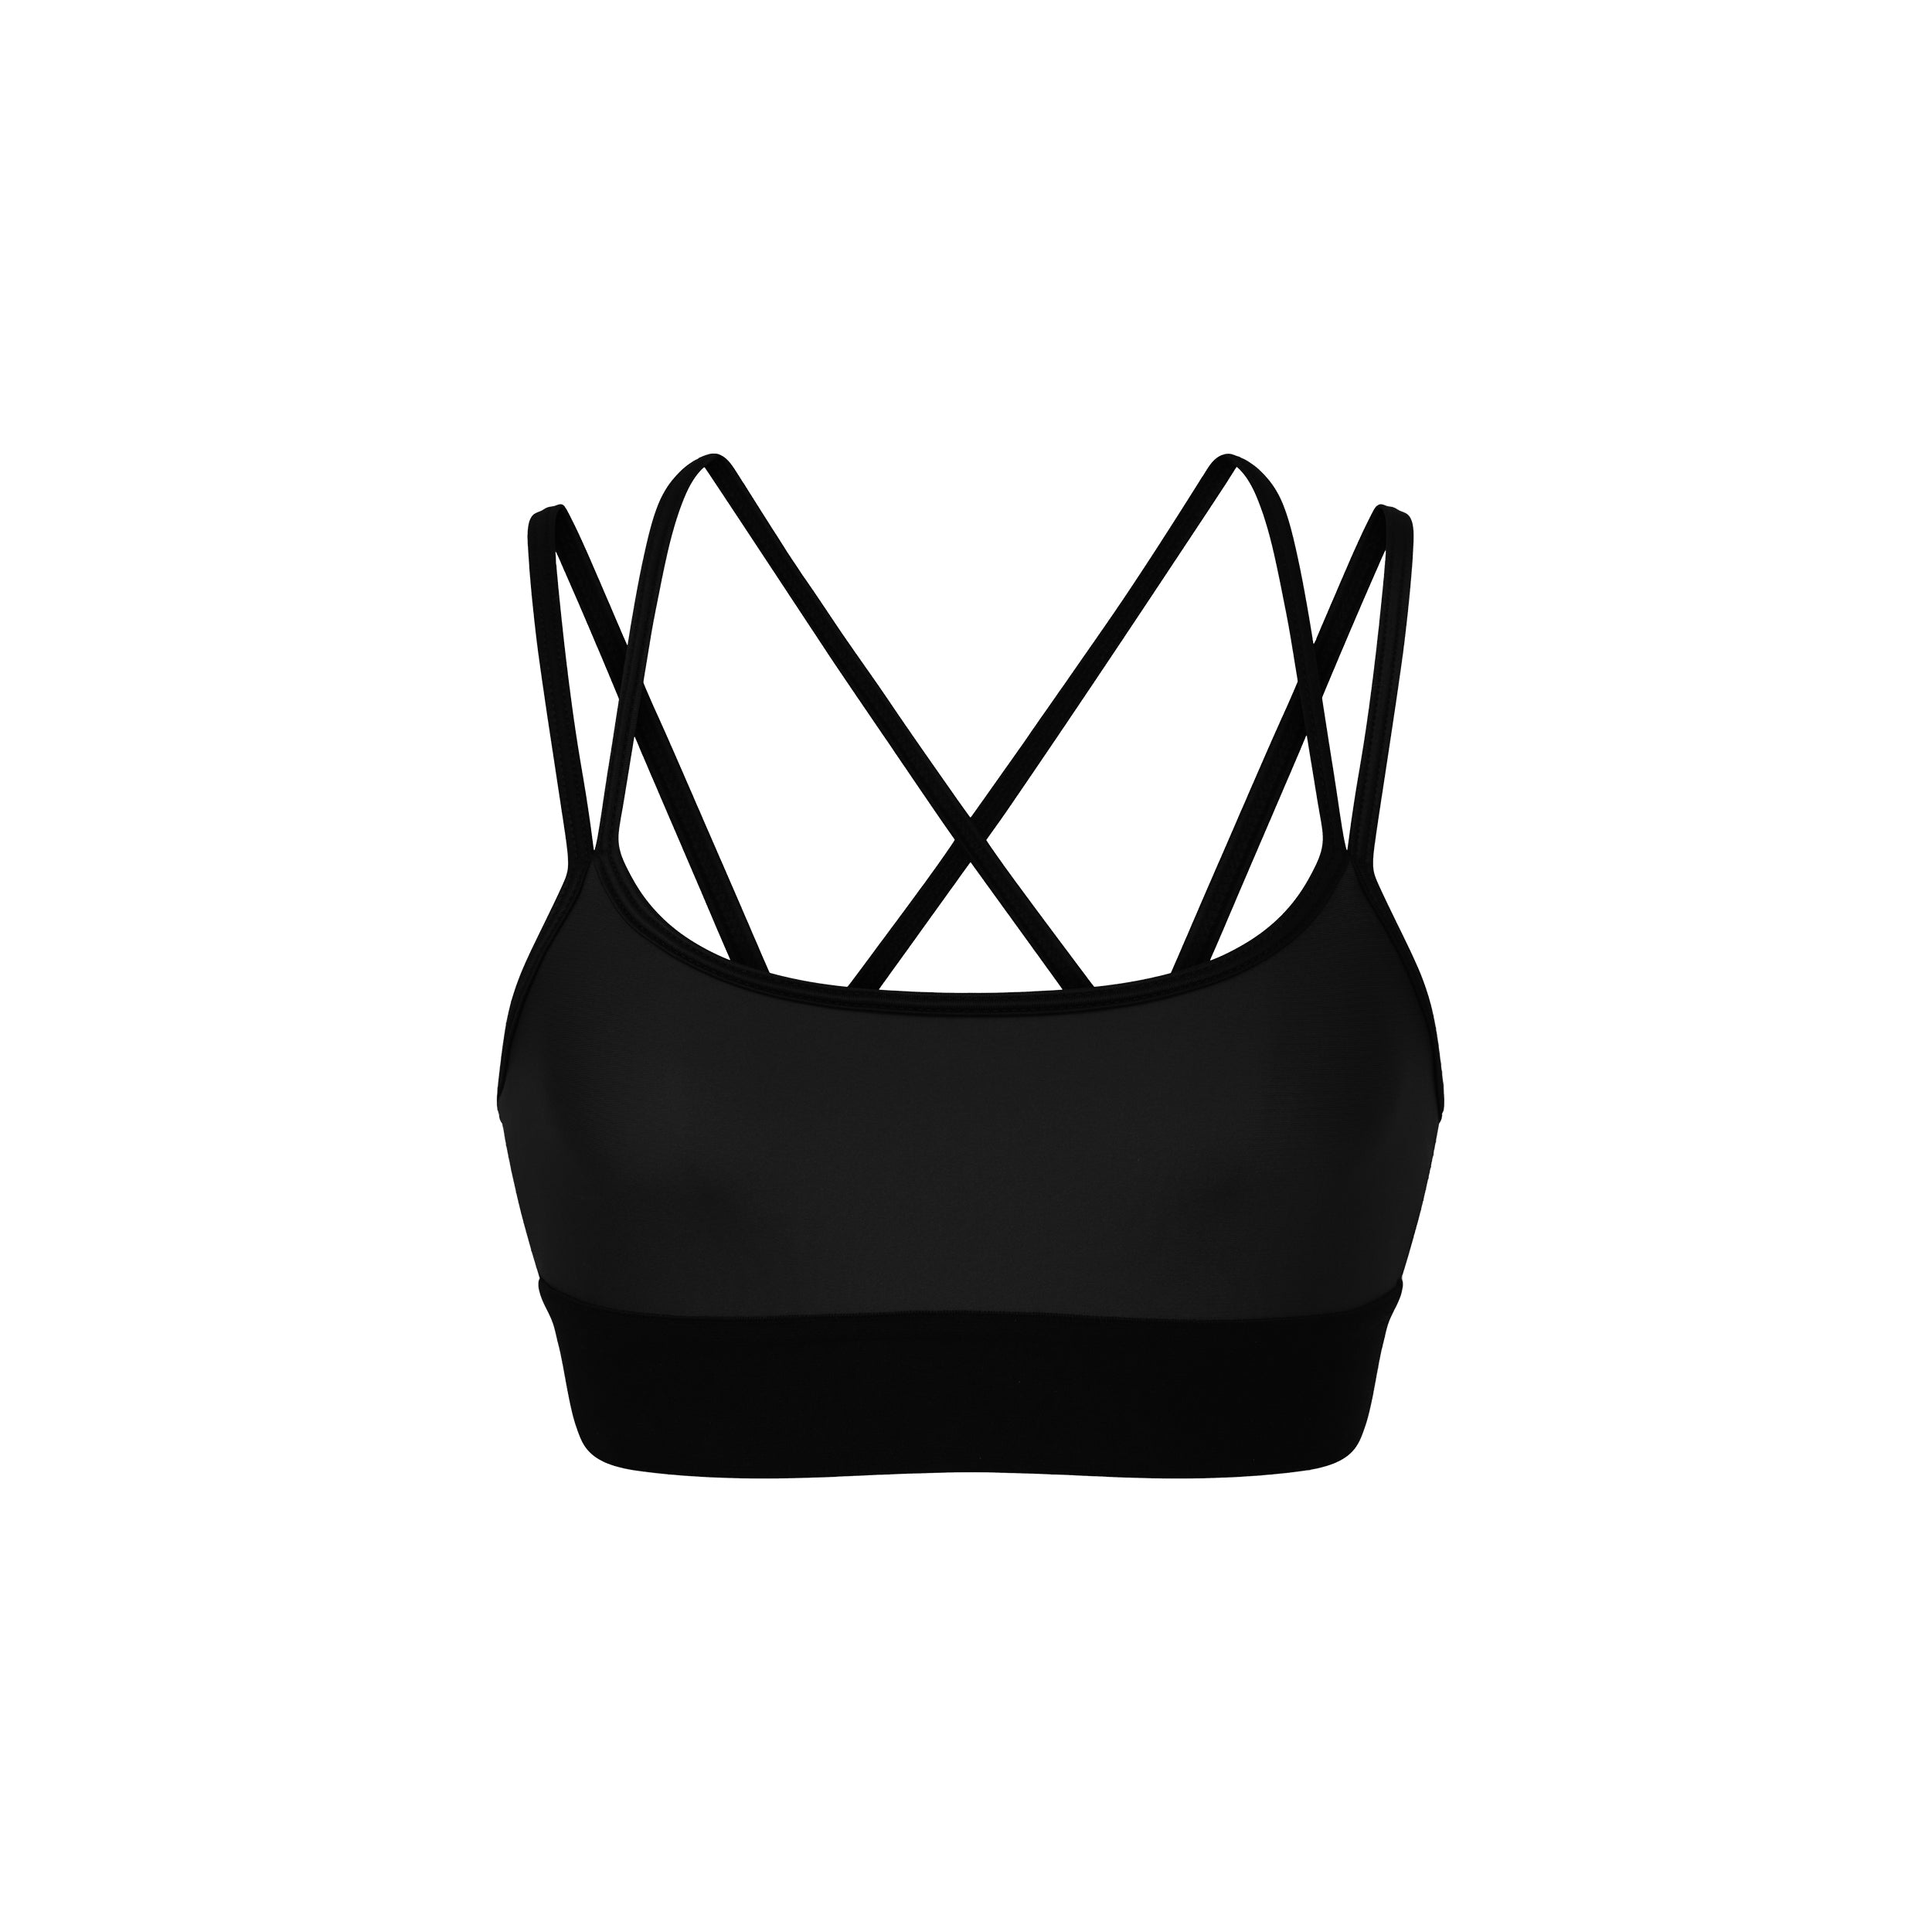 Product shot of black gloss liquid sports bra featuring a scoop neckline and an alluring strappy back with a supportive elastic band